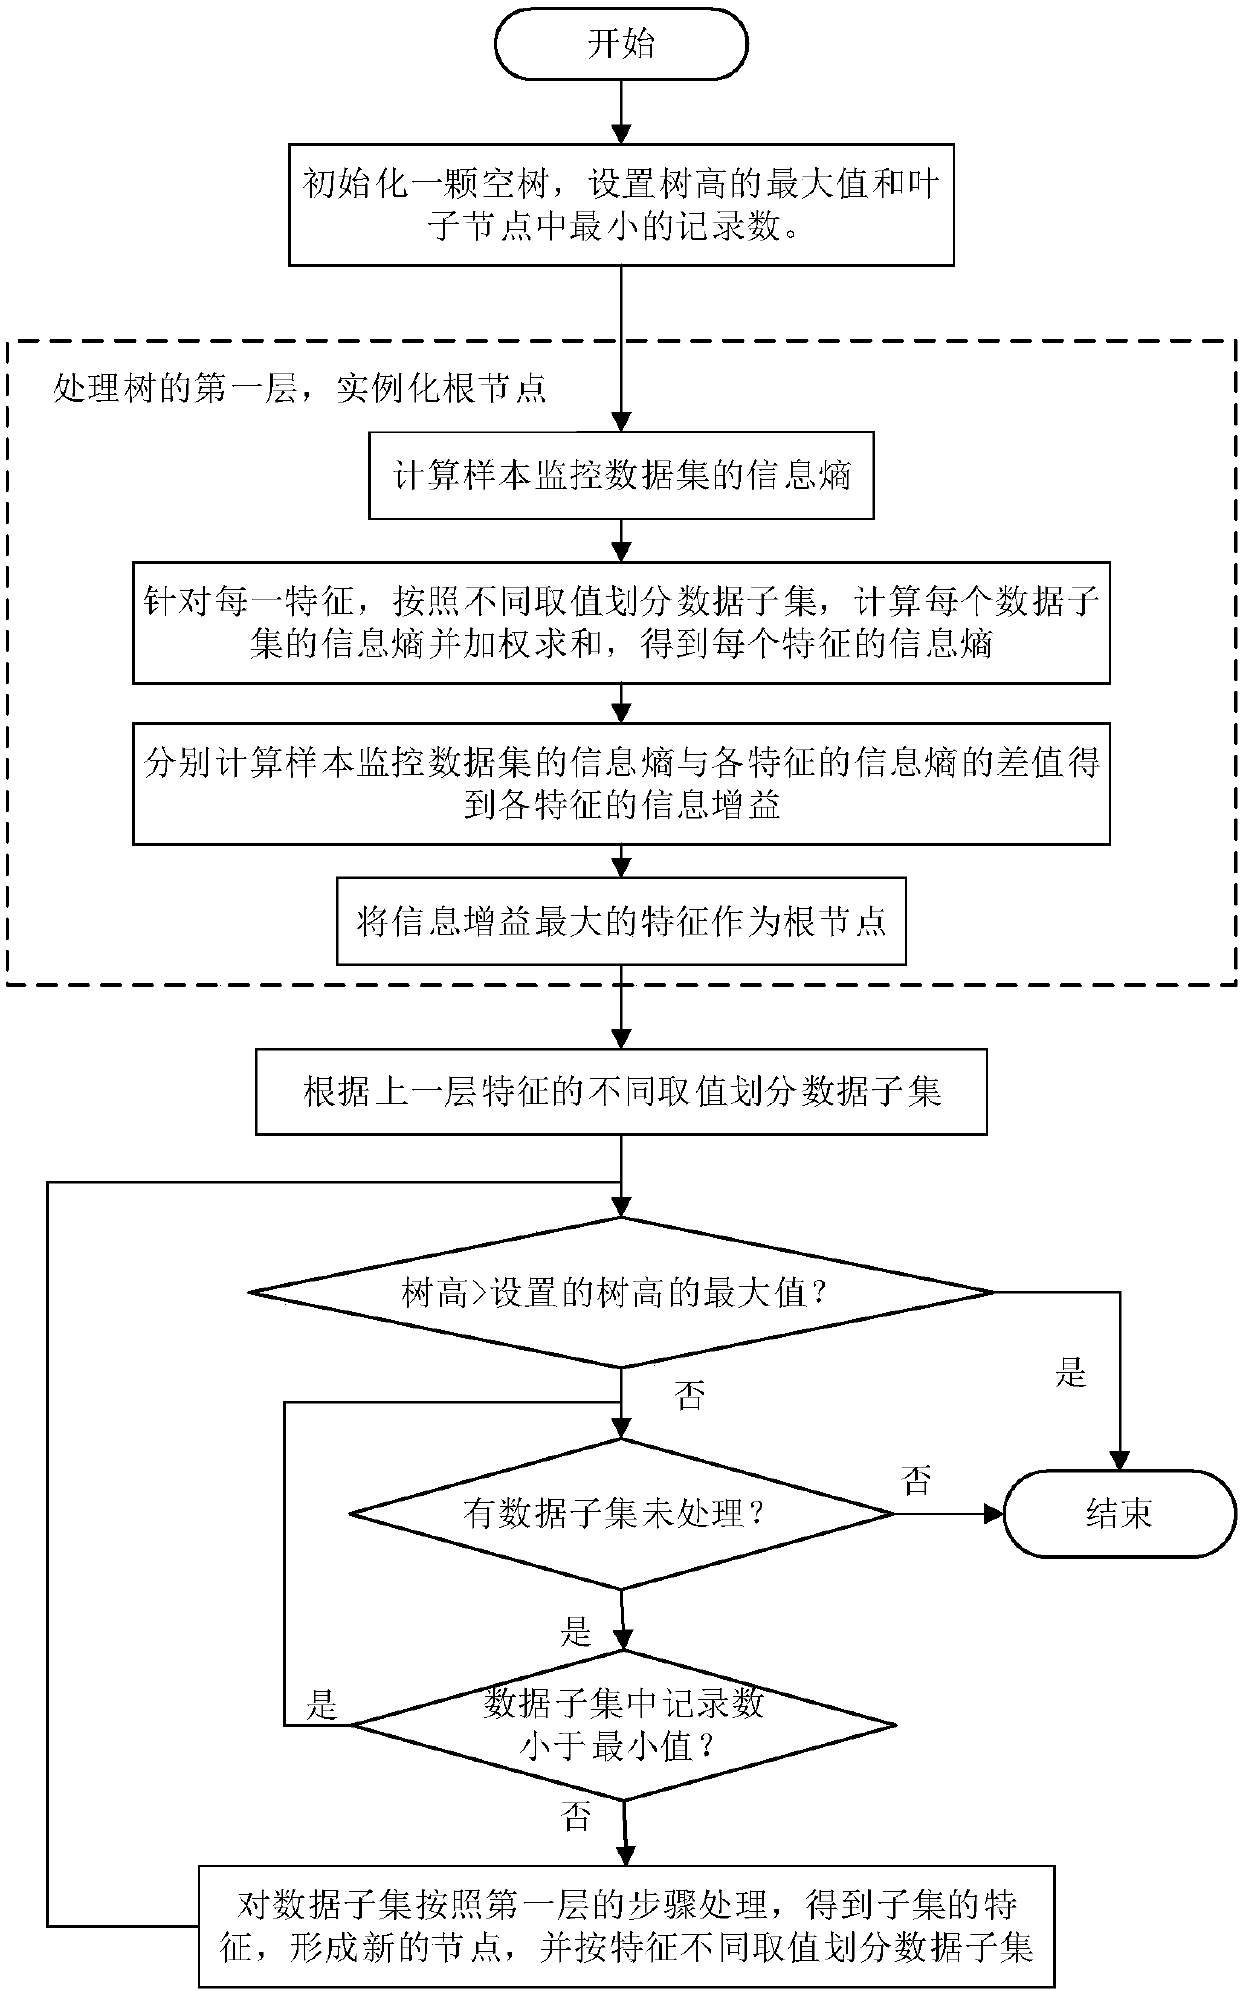 Performance evaluation method and system for GPU applications in CPU-GPU heterogeneous environment